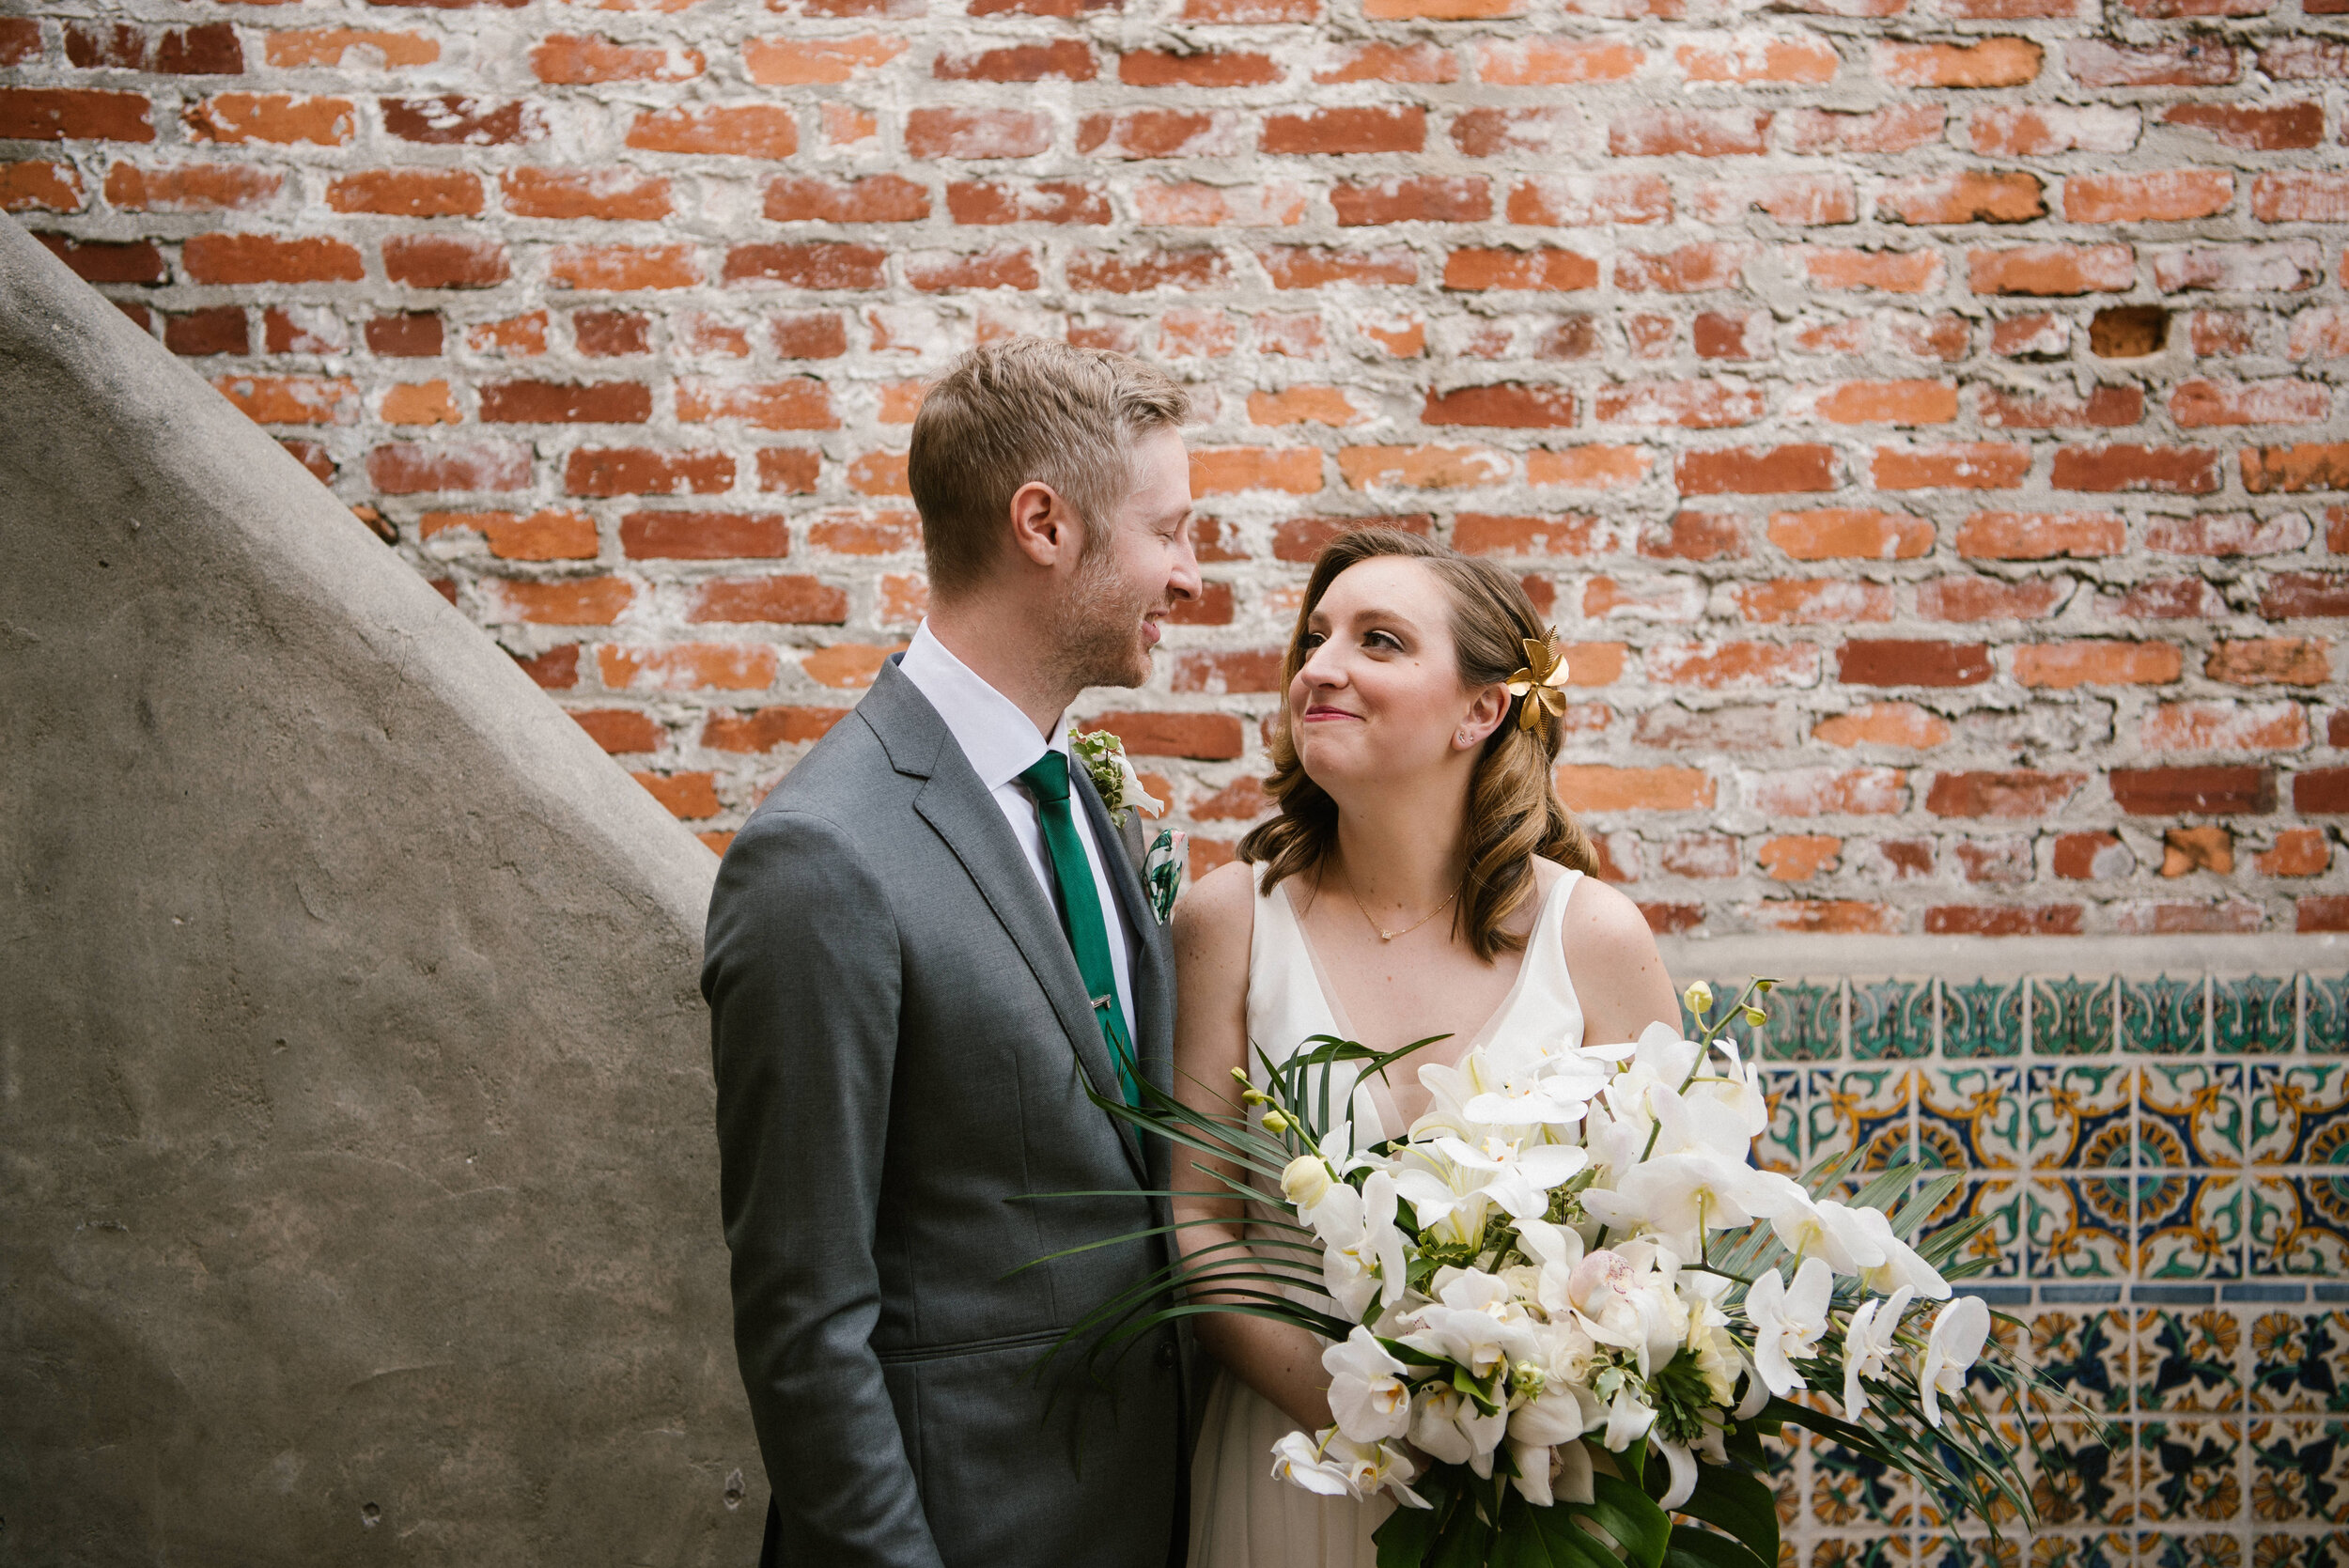 Bluegrass Chic - Casa Feliz Fox and Film Photography Bride and Groom First Look